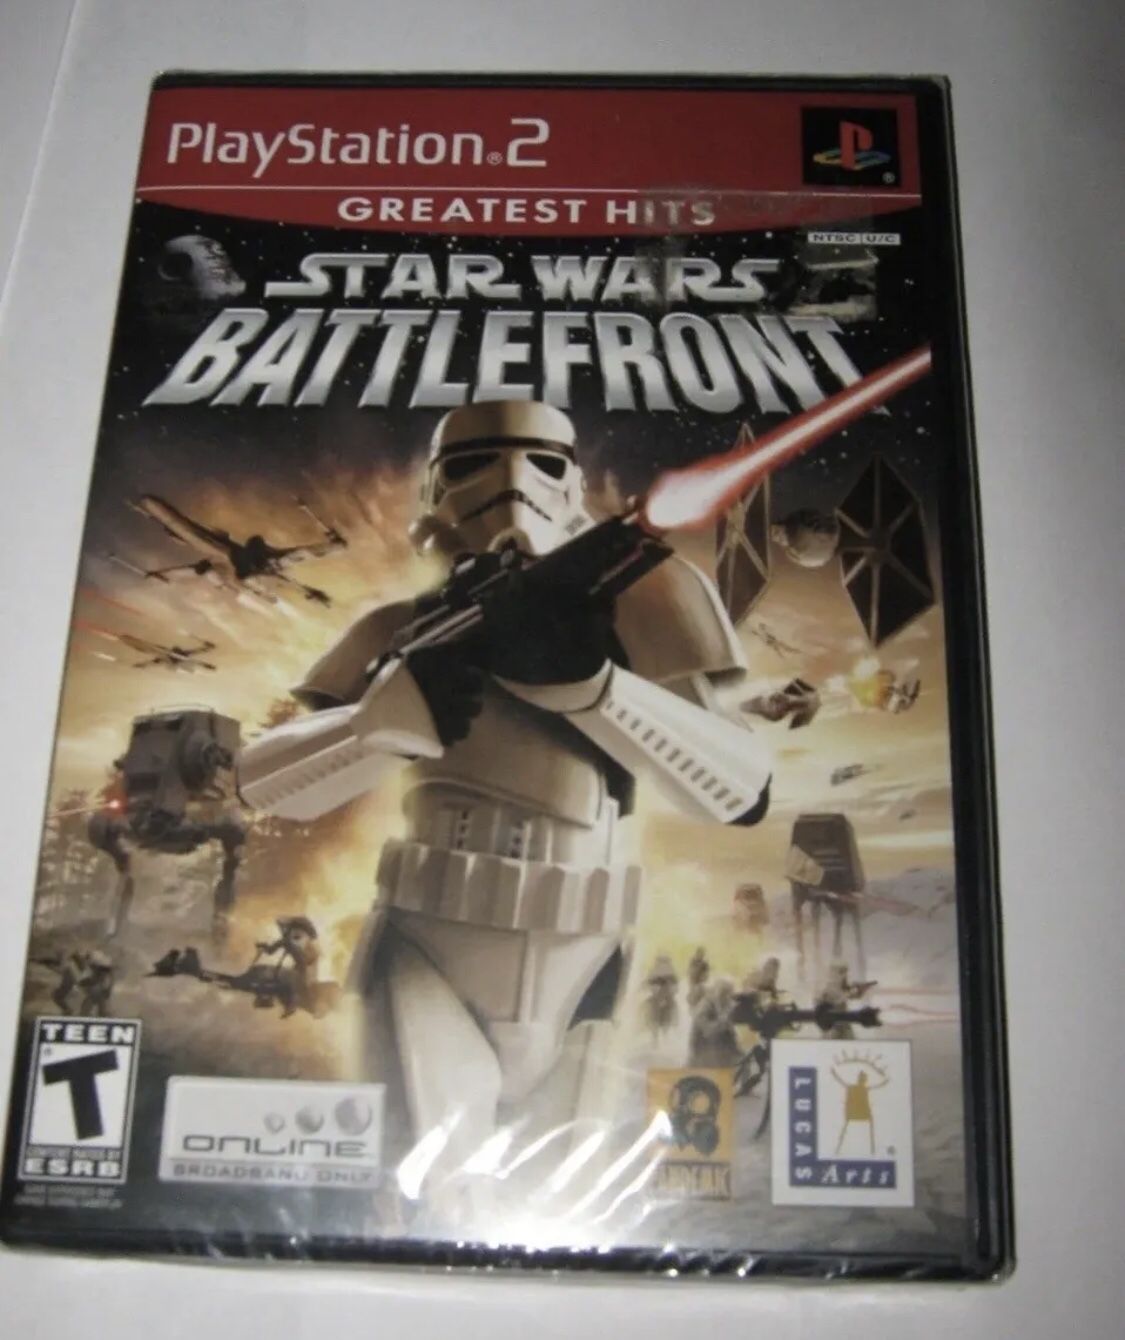 Star Wars: Battlefront (Sony PlayStation 2, 2004) New Unopened Sealed PS2